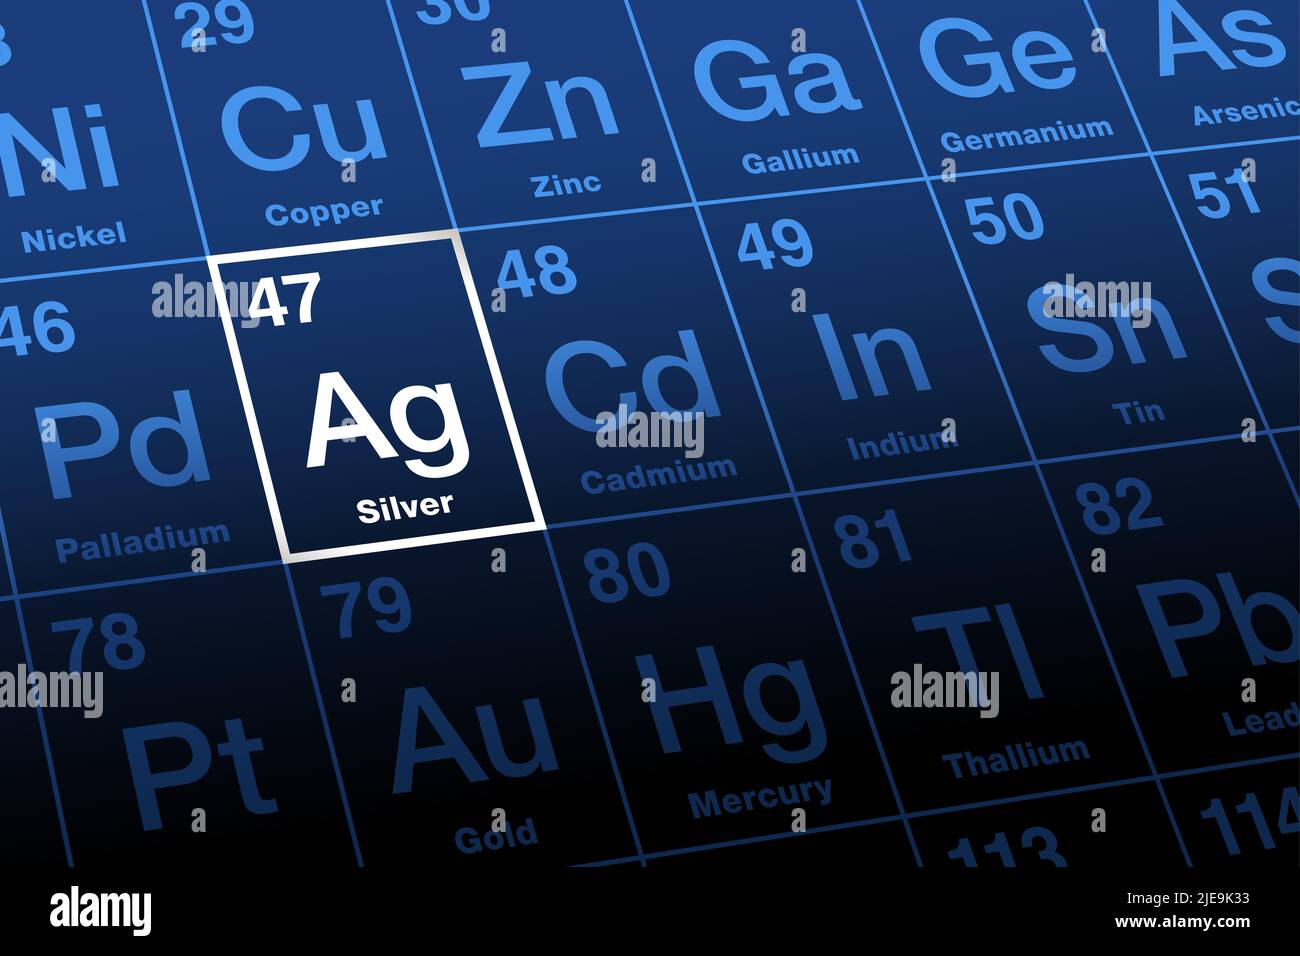 Silver on periodic table of elements. Precious metal with chemical symbol Ag (Latin argentum), with atomic number 47. A safe investment or safe haven. Stock Photo